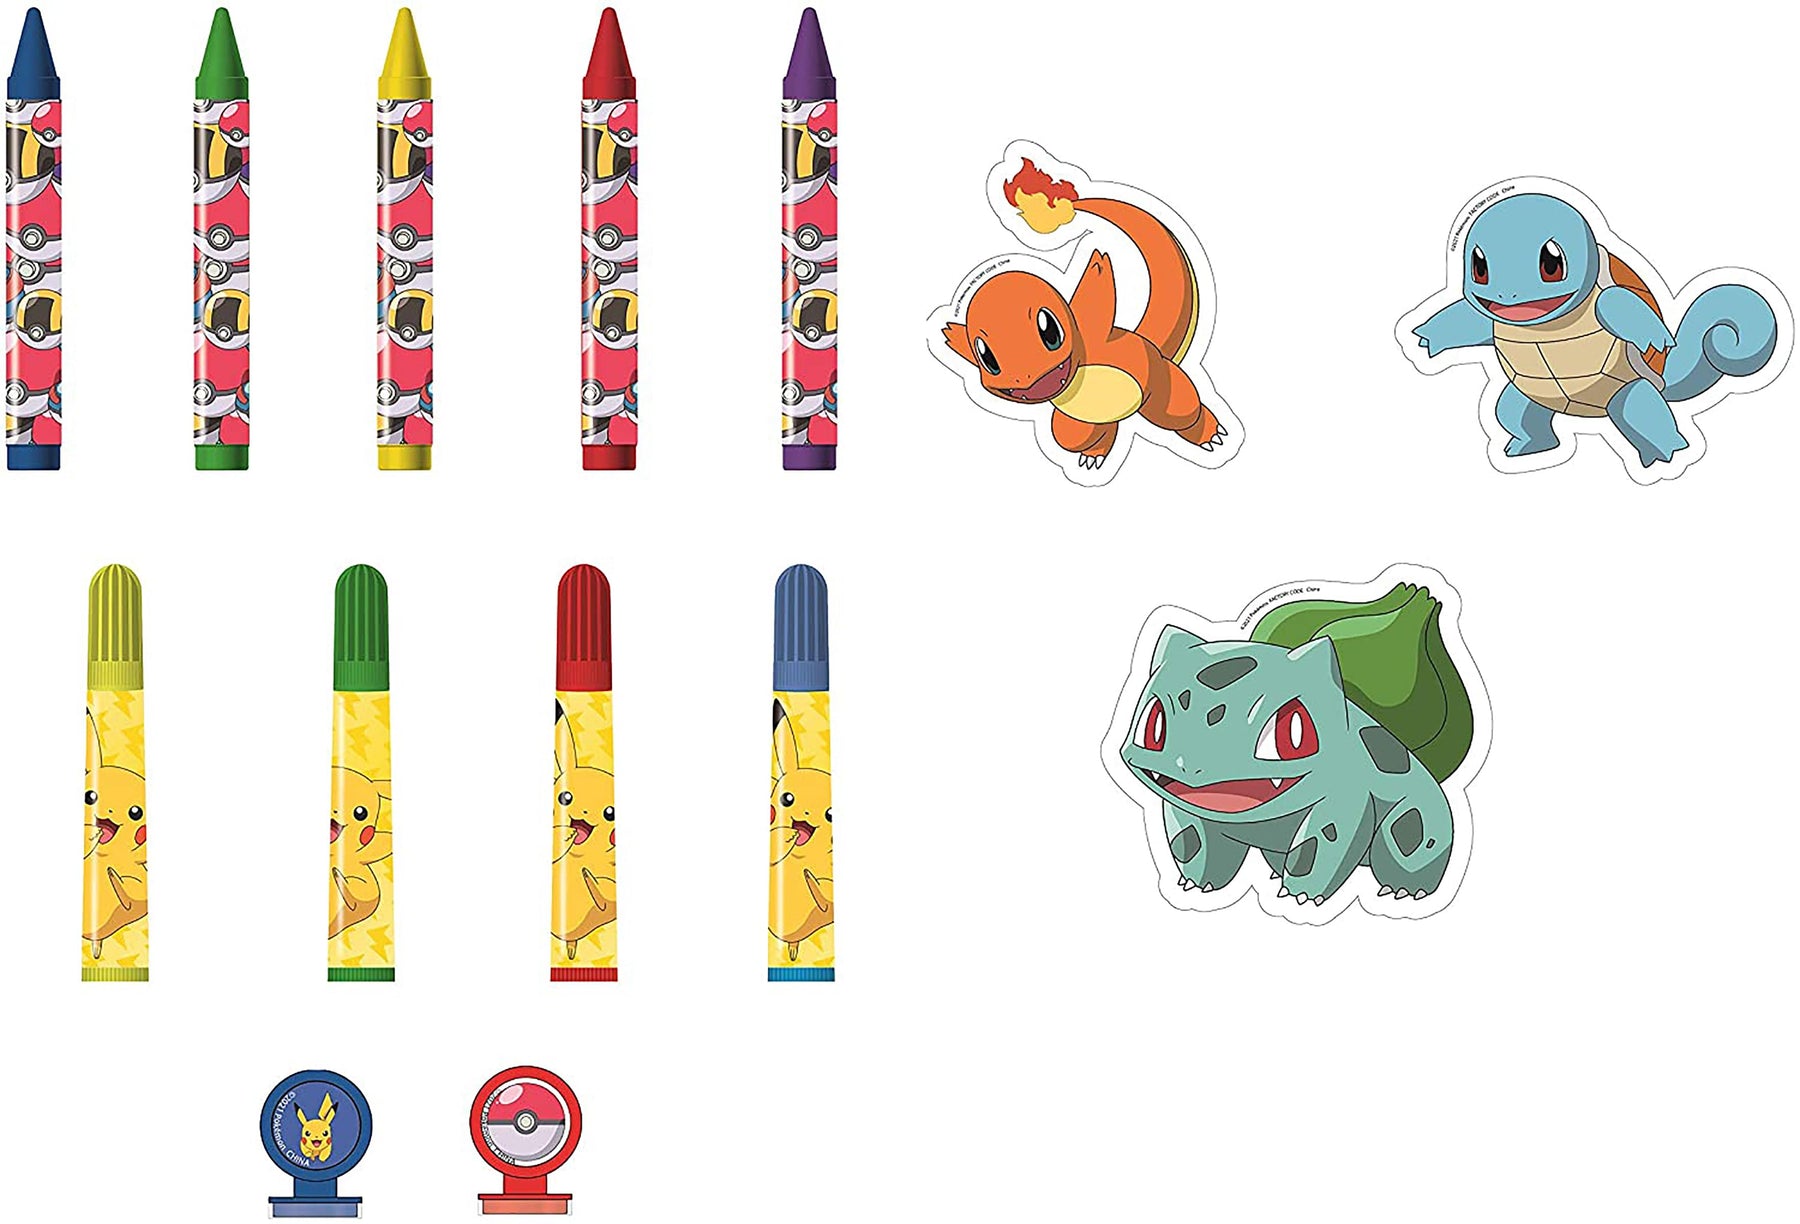  Innovative Designs Pokemon Kids Coloring Art and Sticker Set,  30 Pcs. & Craft Supplies with Pencil Case : Toys & Games